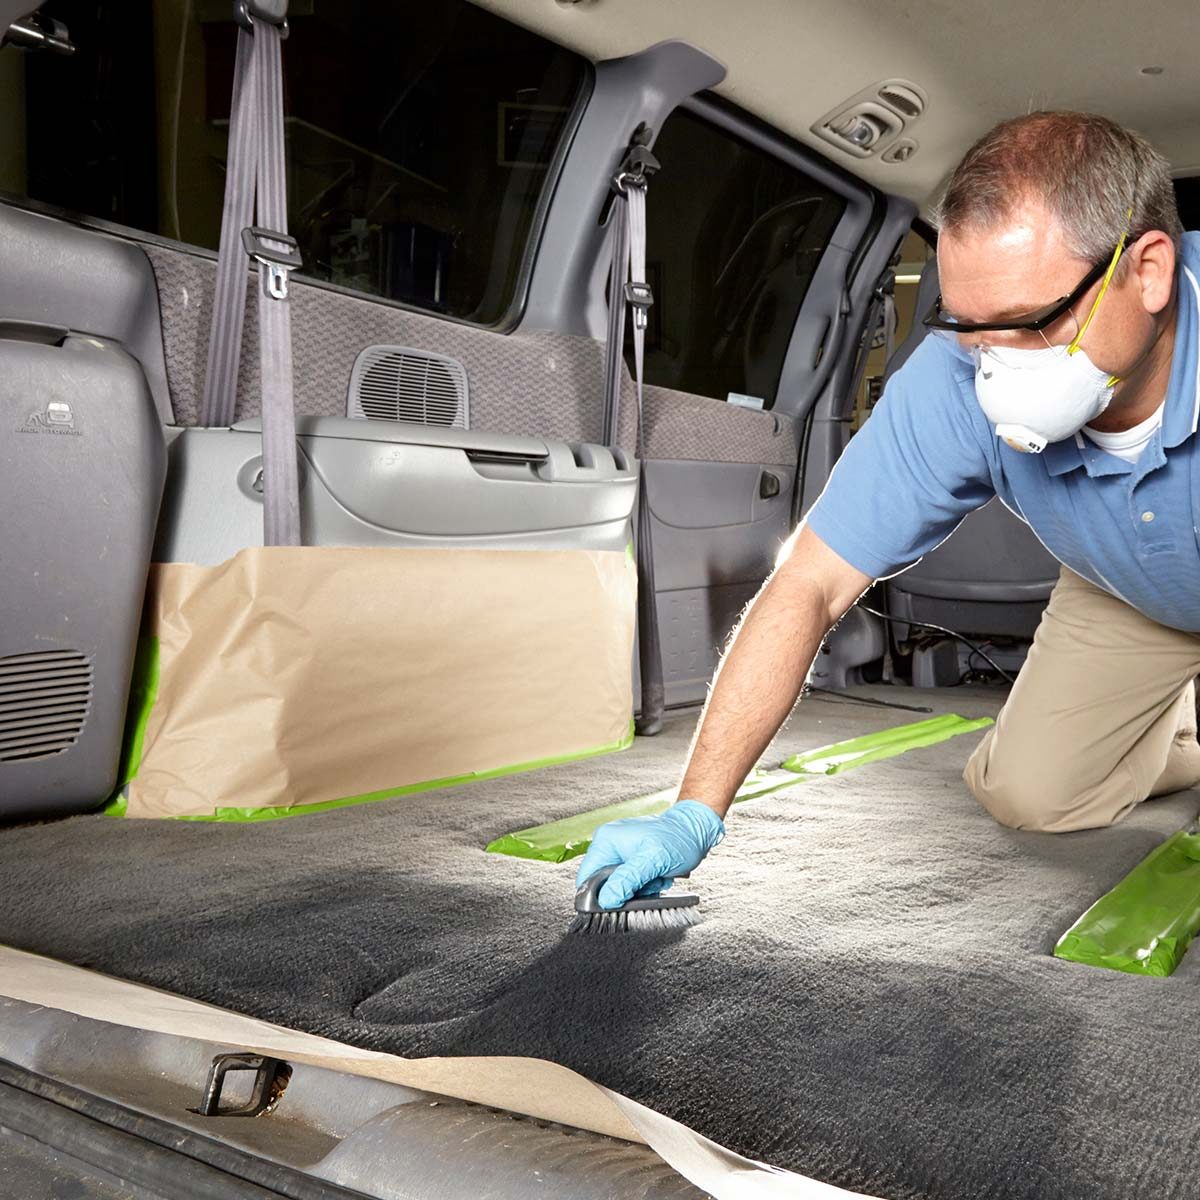 47 DIY Tips for Detailing Cars Like a Pro